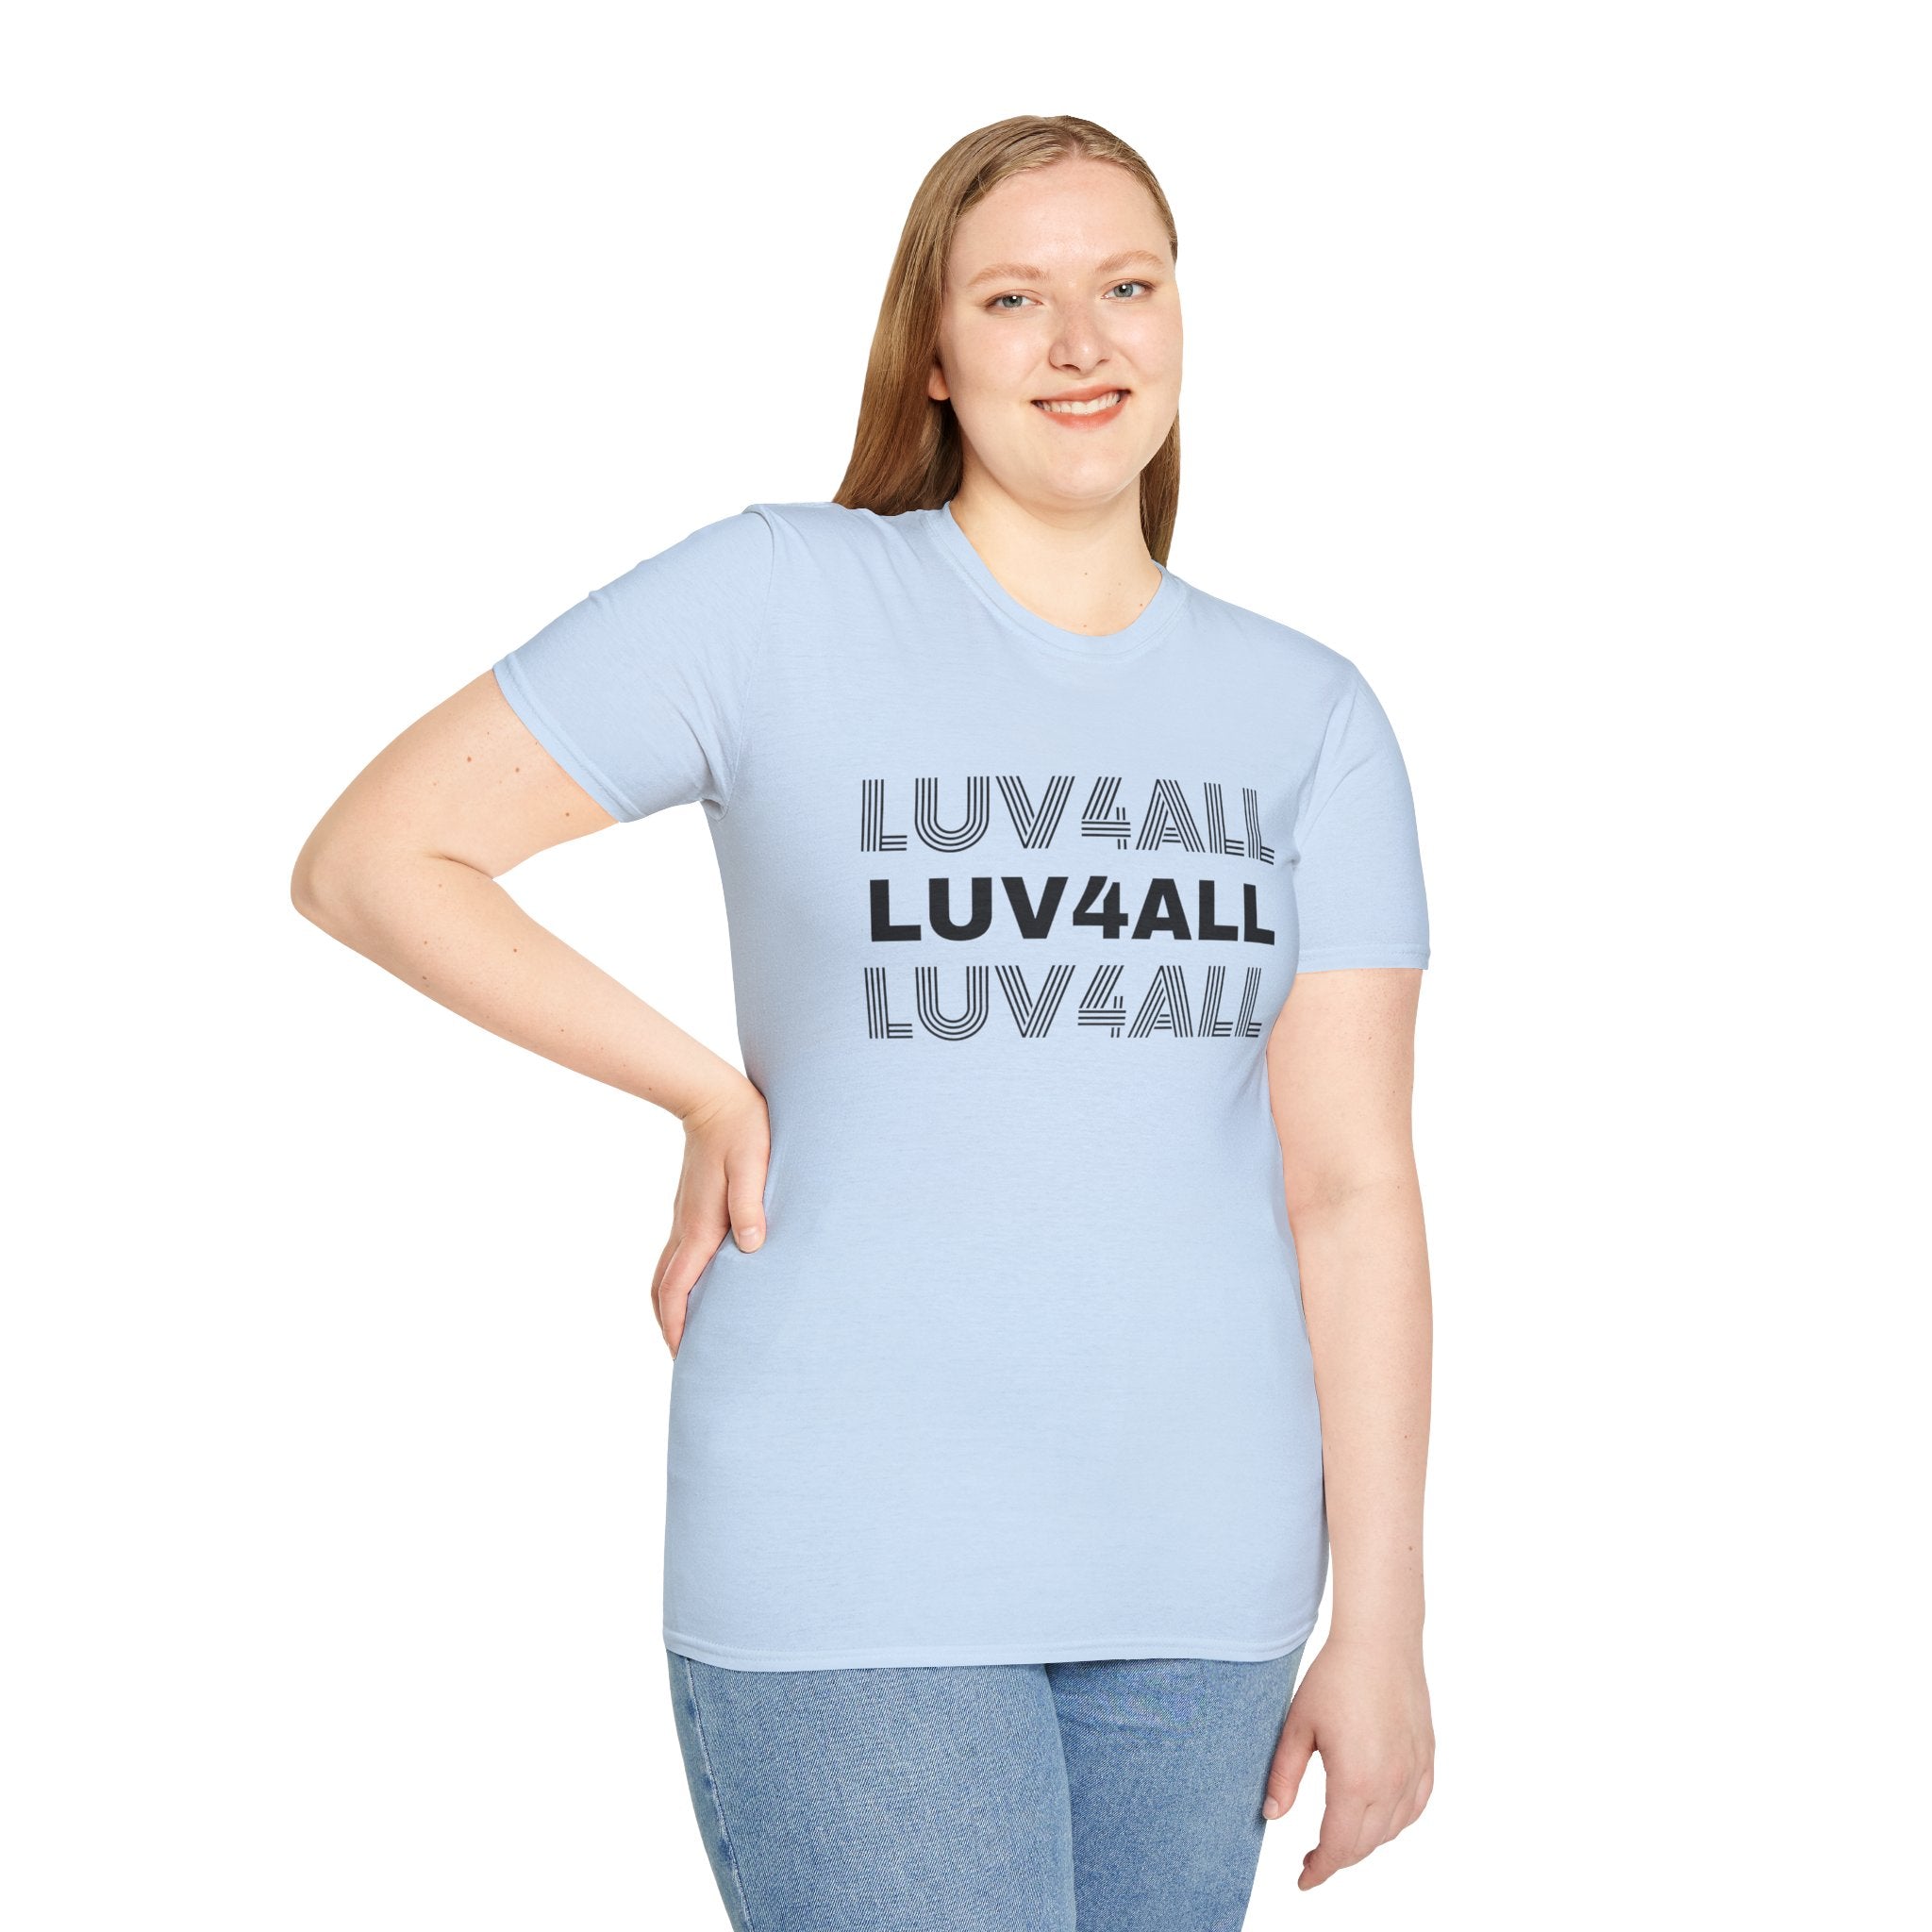 Luv4ALL Unisex Softstyle Crew Neck T-Shirt, Kindness Shirt